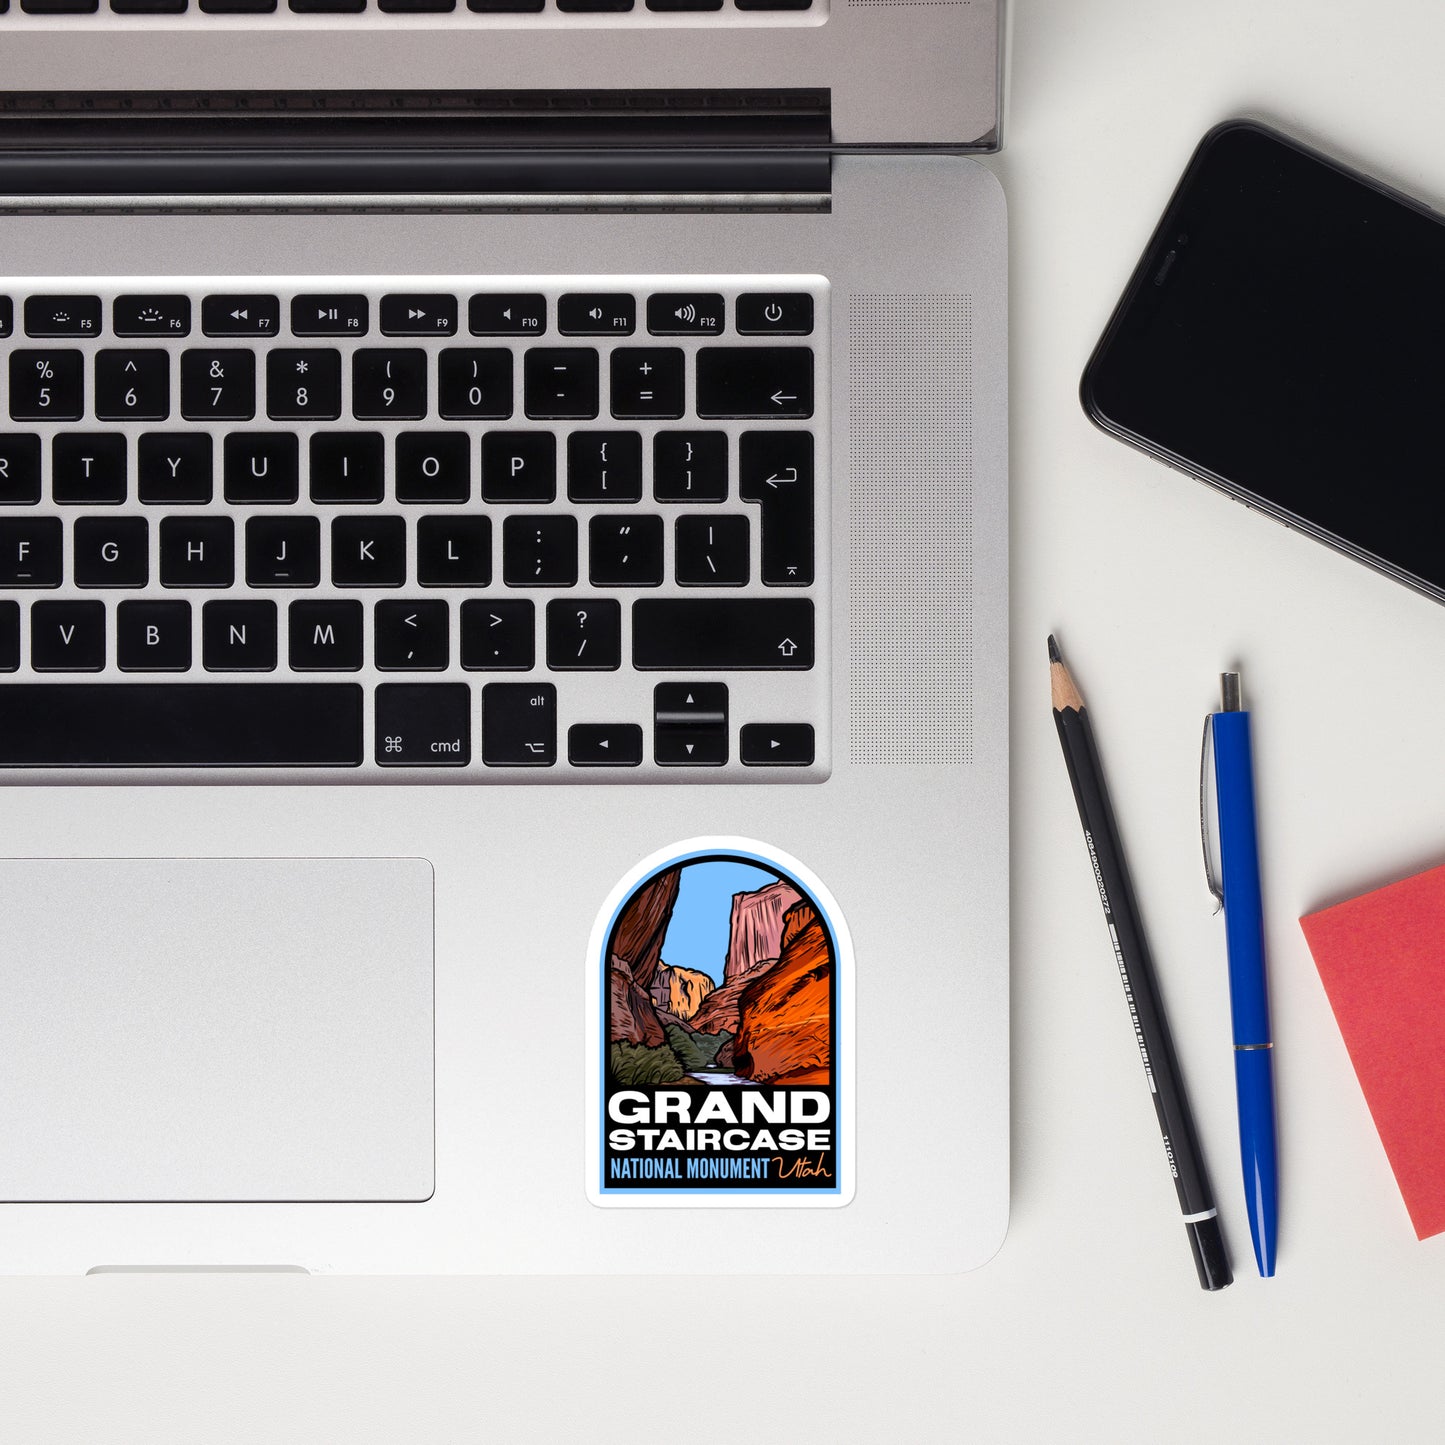 A sticker of Grand Staircase National Monument on a laptop